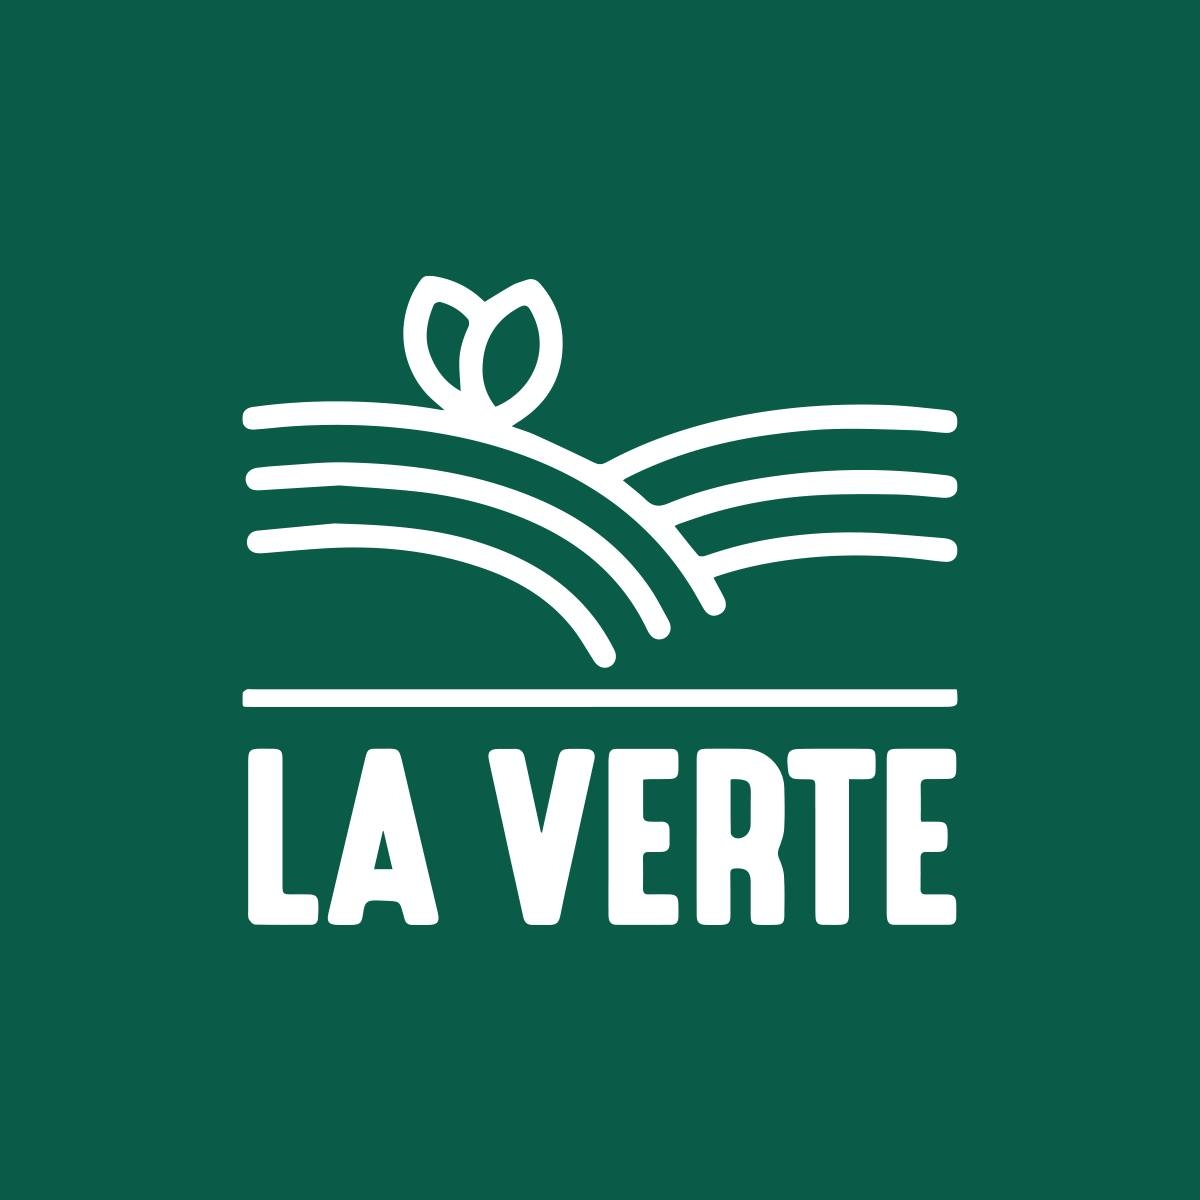 LA VERTE offers online healthy food delivery it's logo includes green background and the word LA VERTE